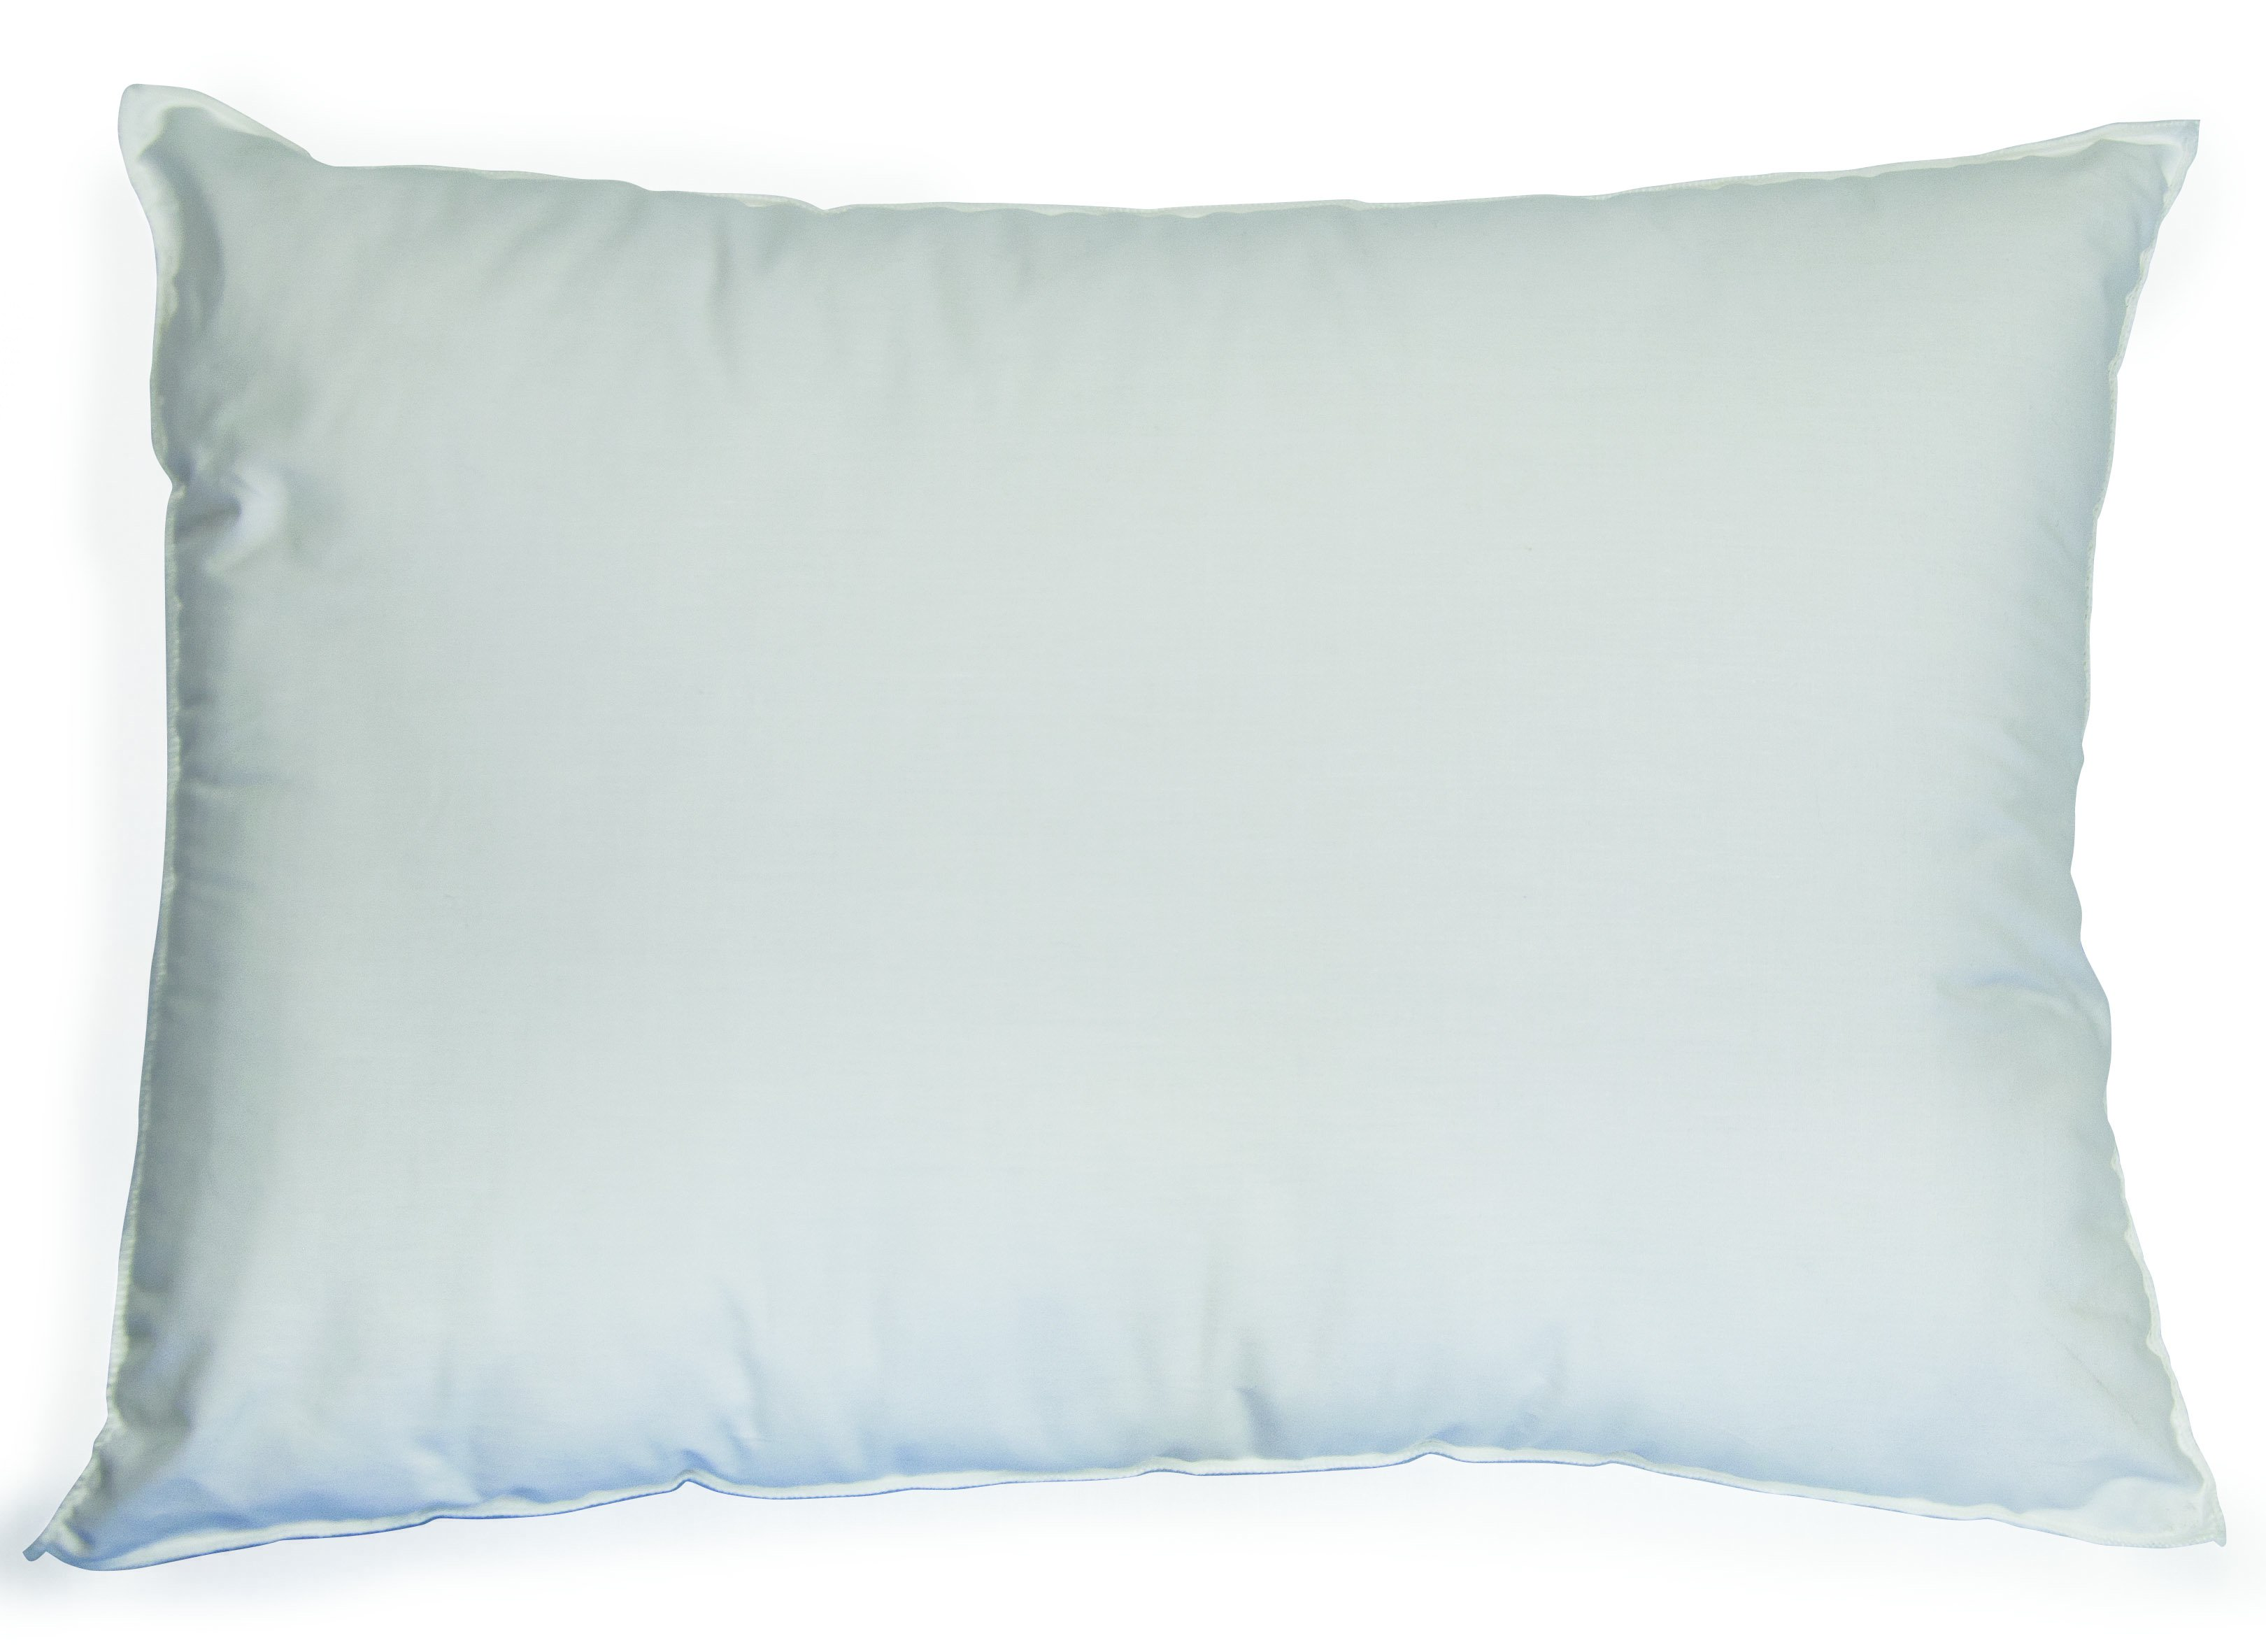 McKesson Disposable Bed Pillow, 20